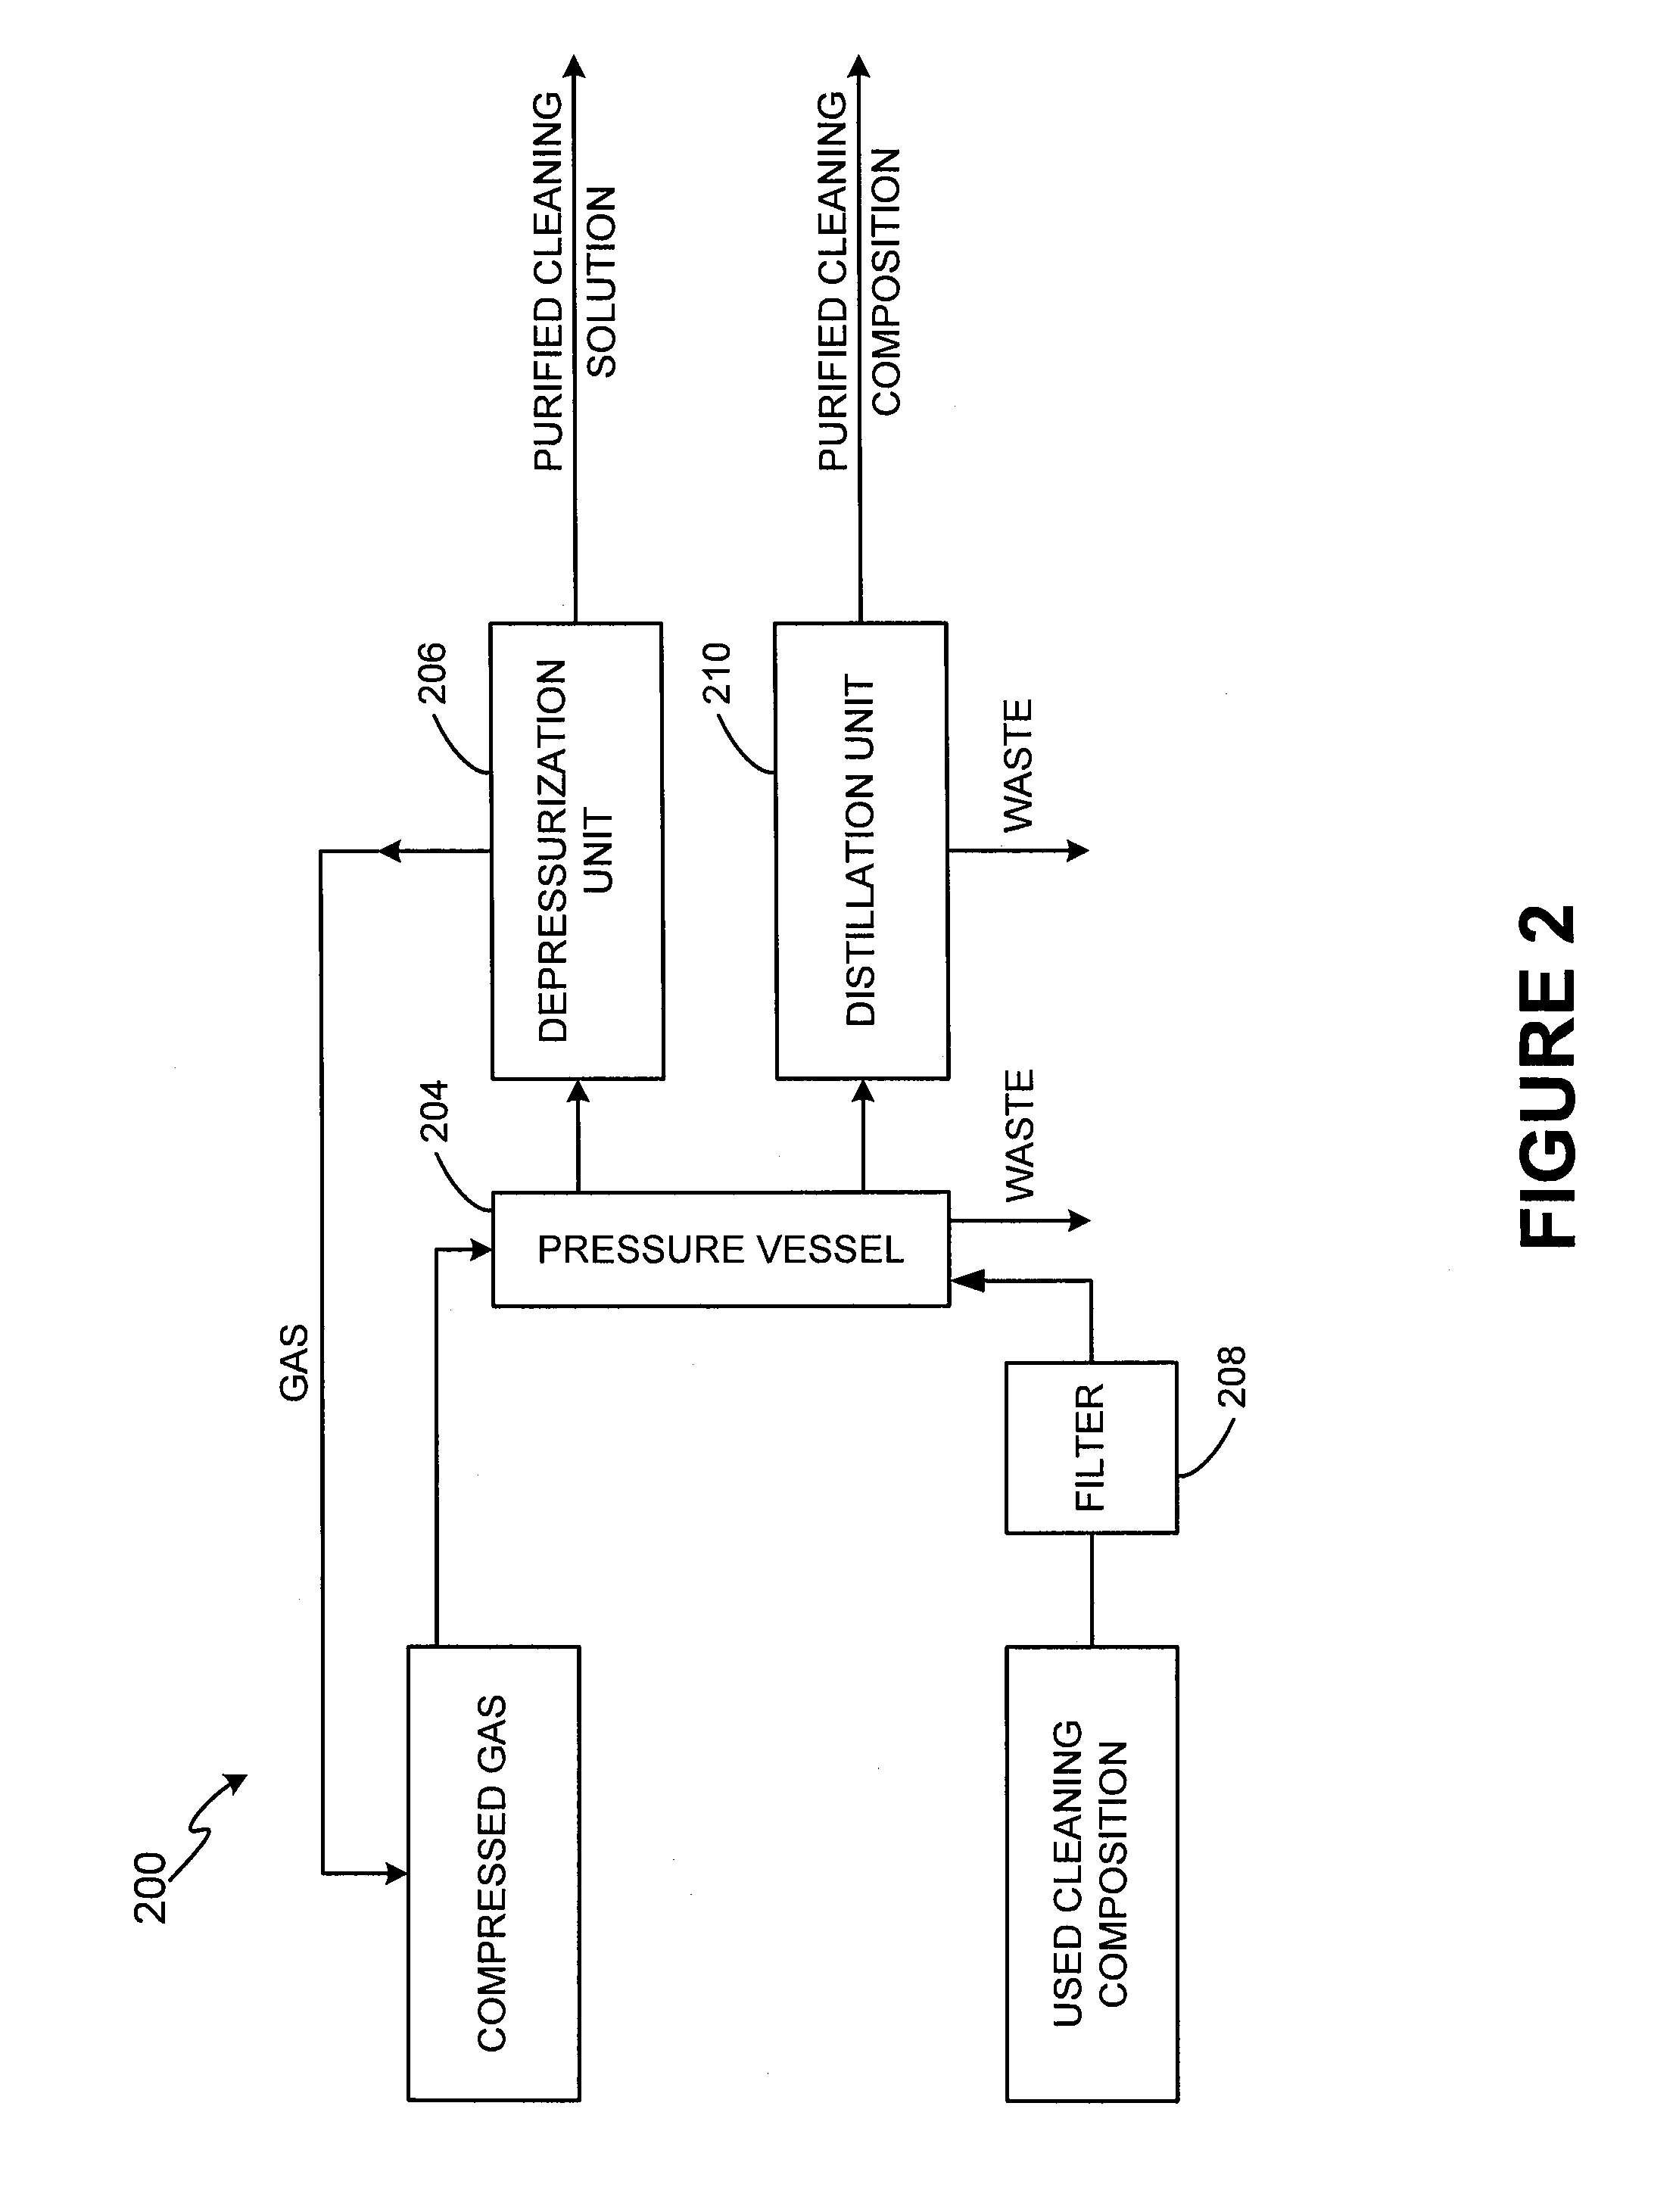 Composition for cleaning and degreasing, system for using the composition, and methods of forming and using the composition